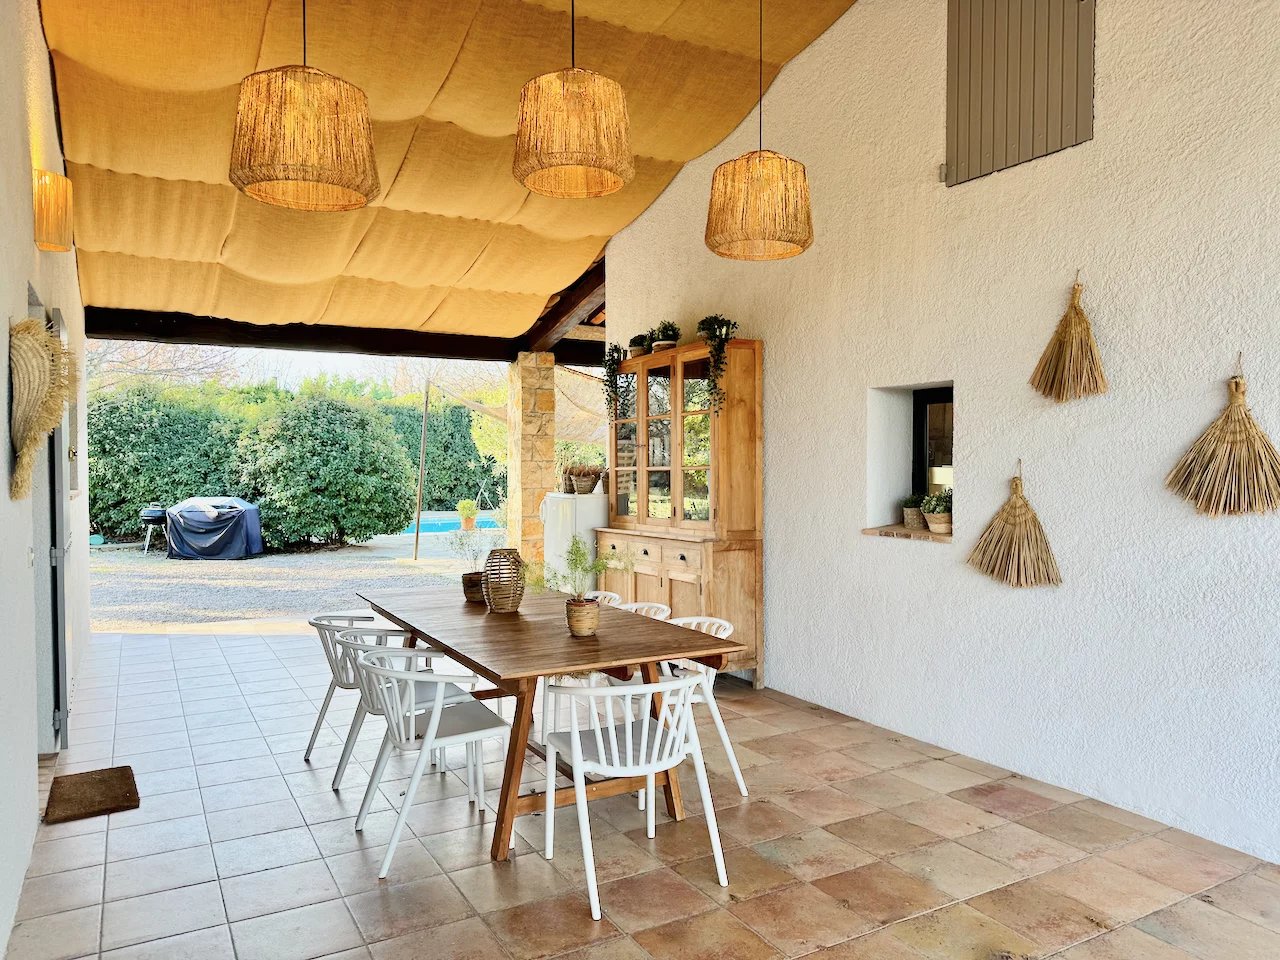 Saint-Paul-en-Fôret: beautifully located and 'turn-key' / ready-to-move detached villa!